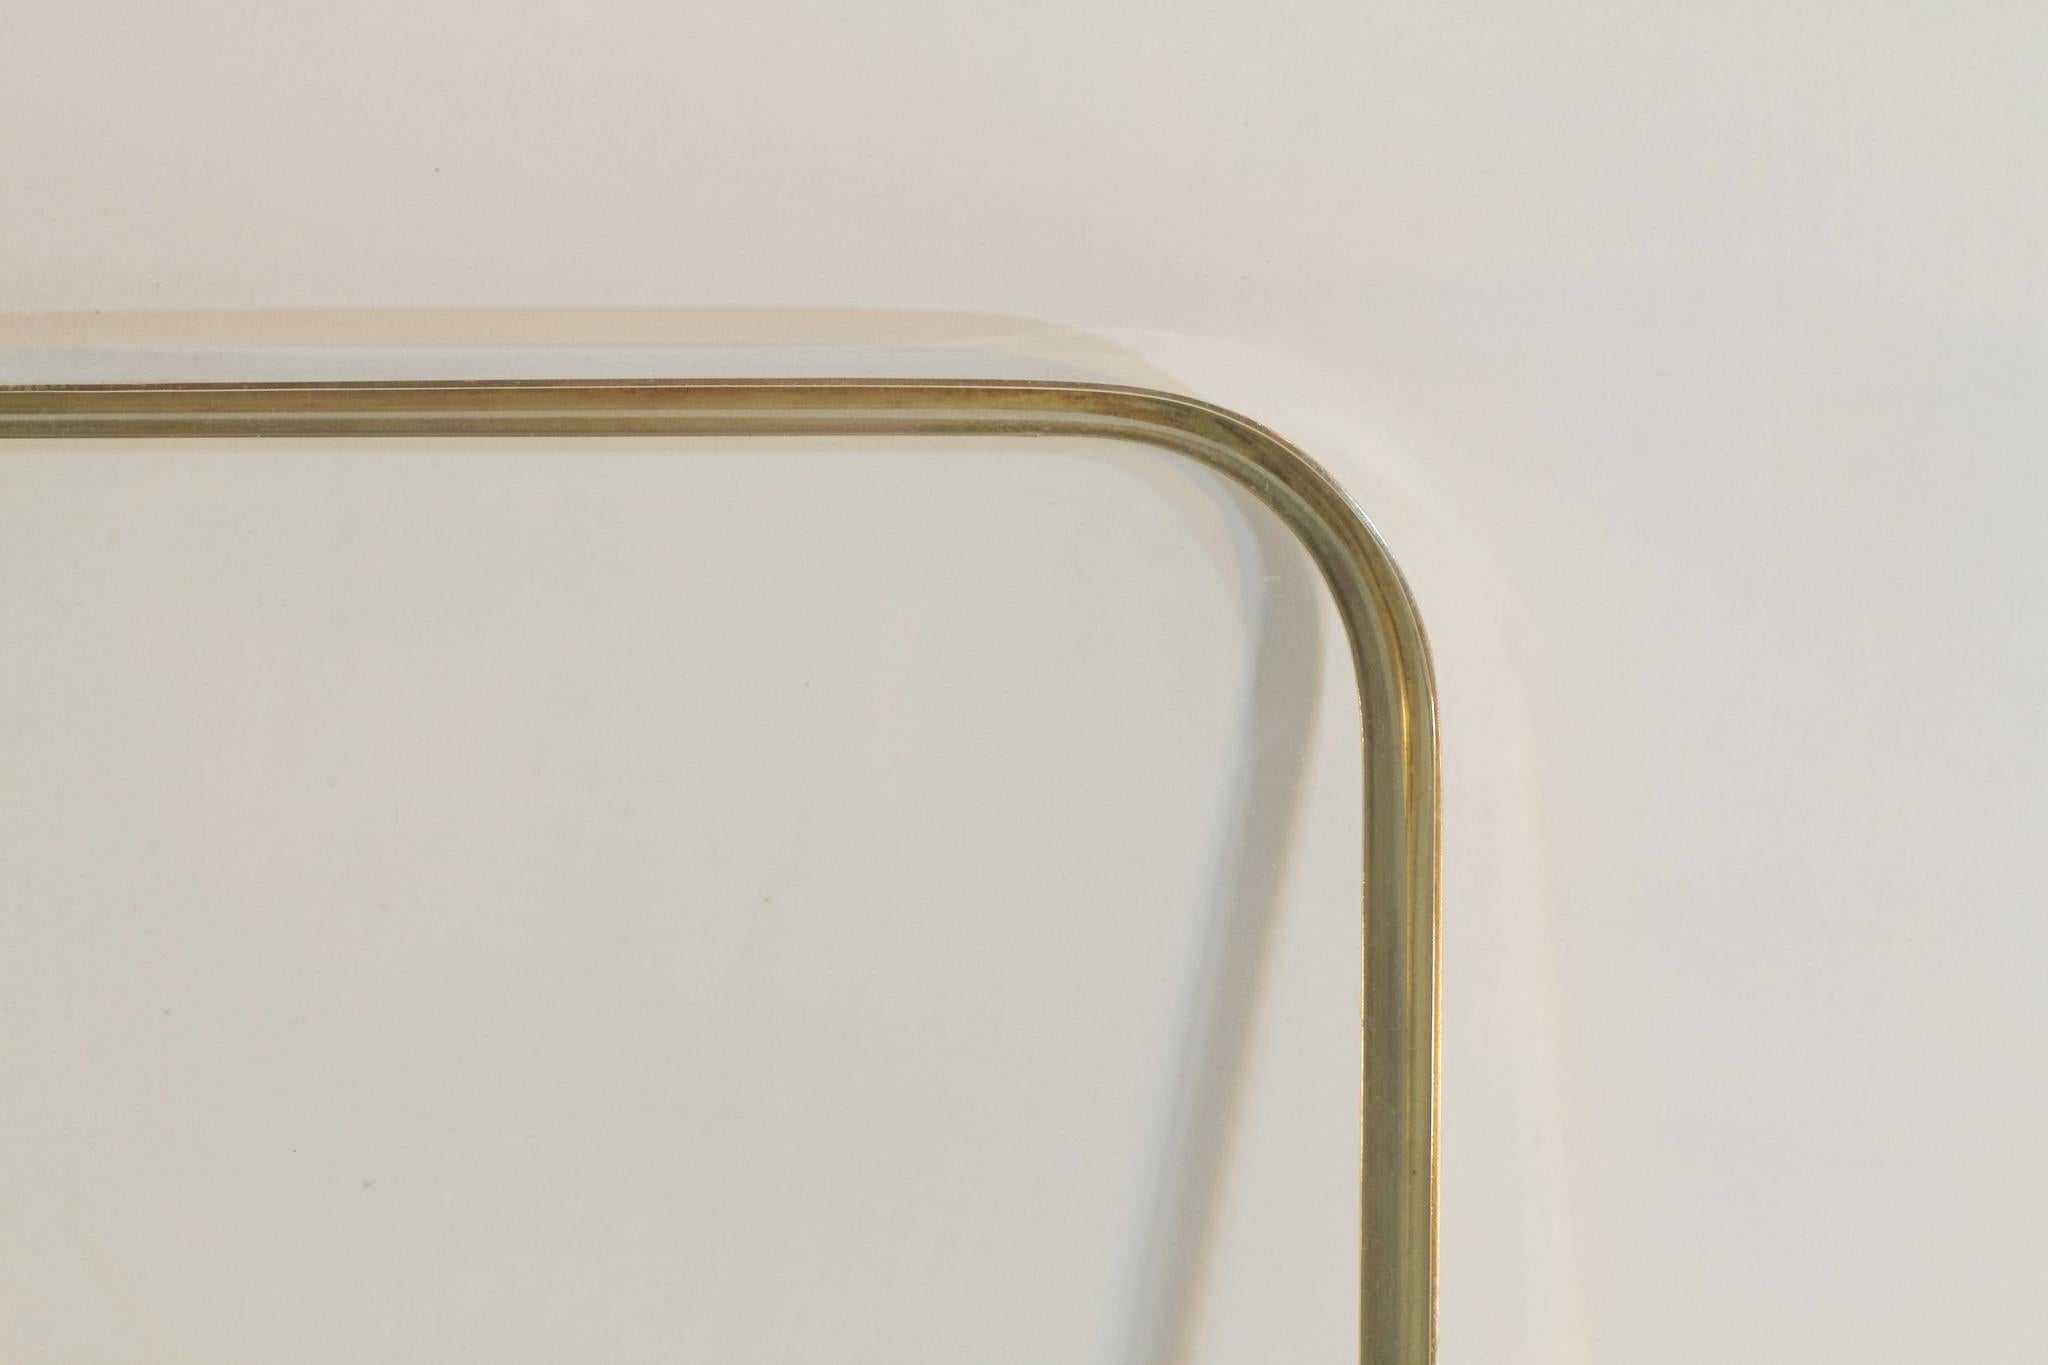 A 1950s single tray in solid brass centered around glass.